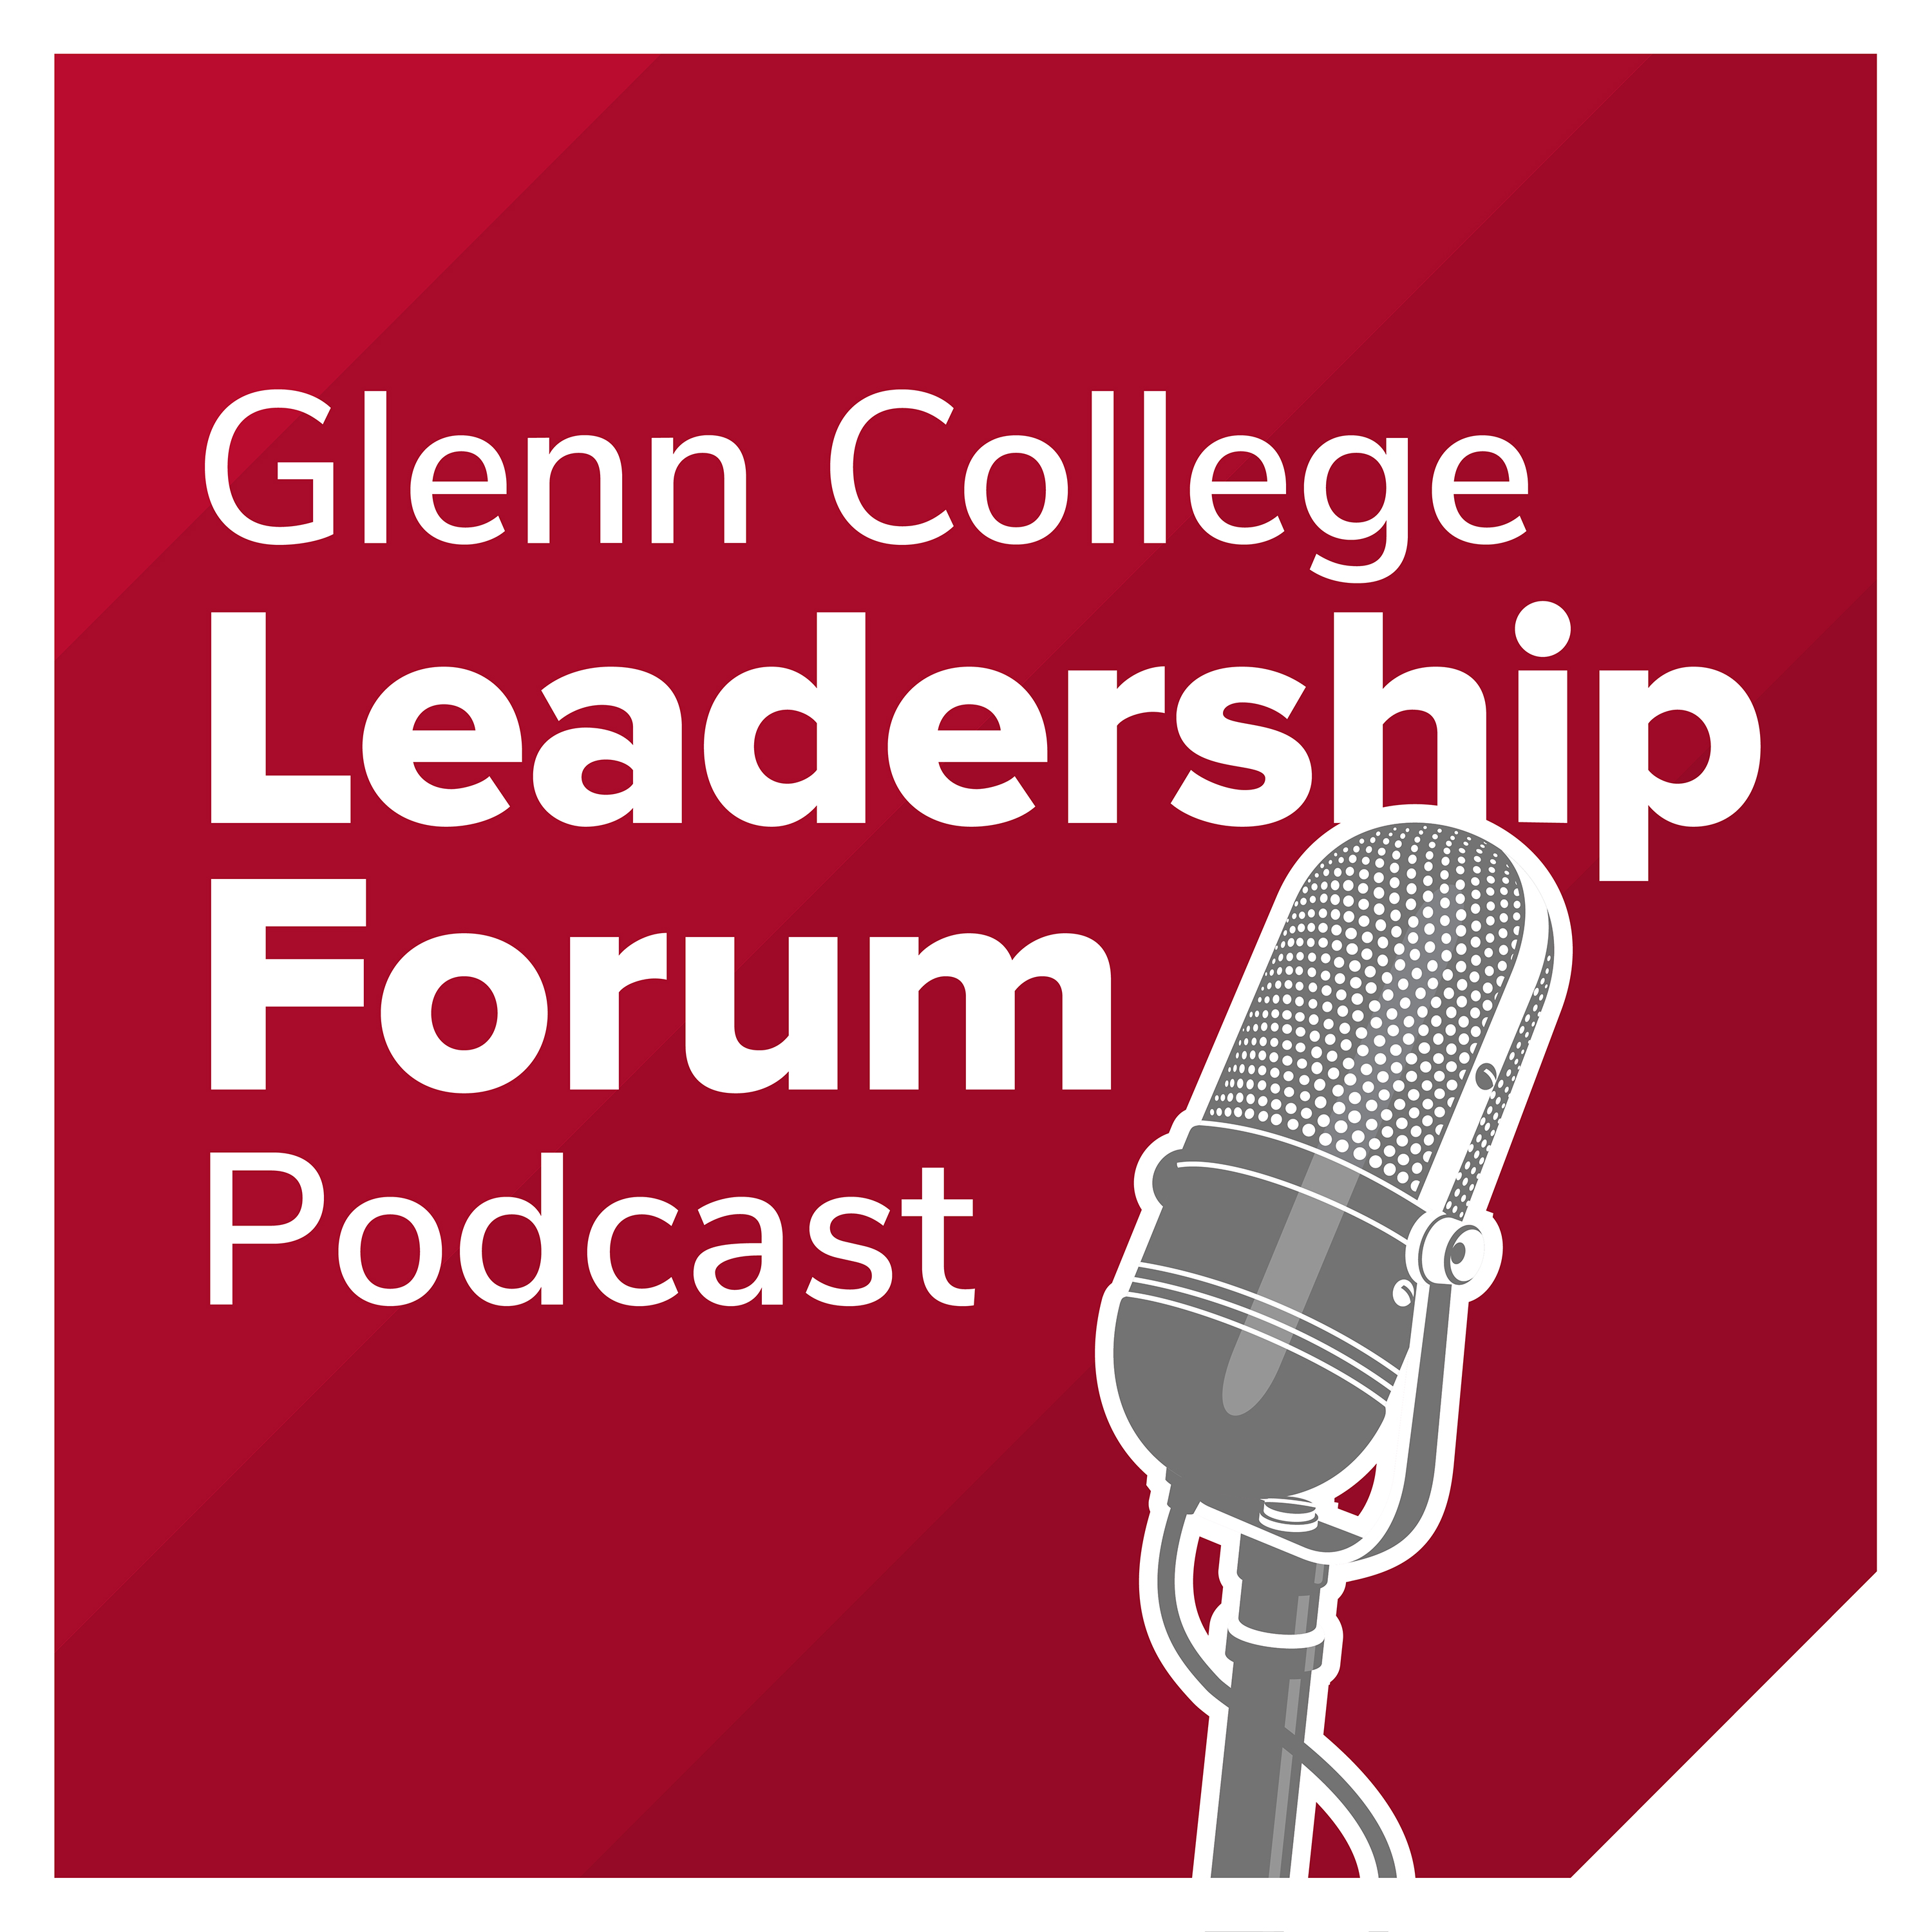 Artwork for podcast Leadership Forum: The Podcast